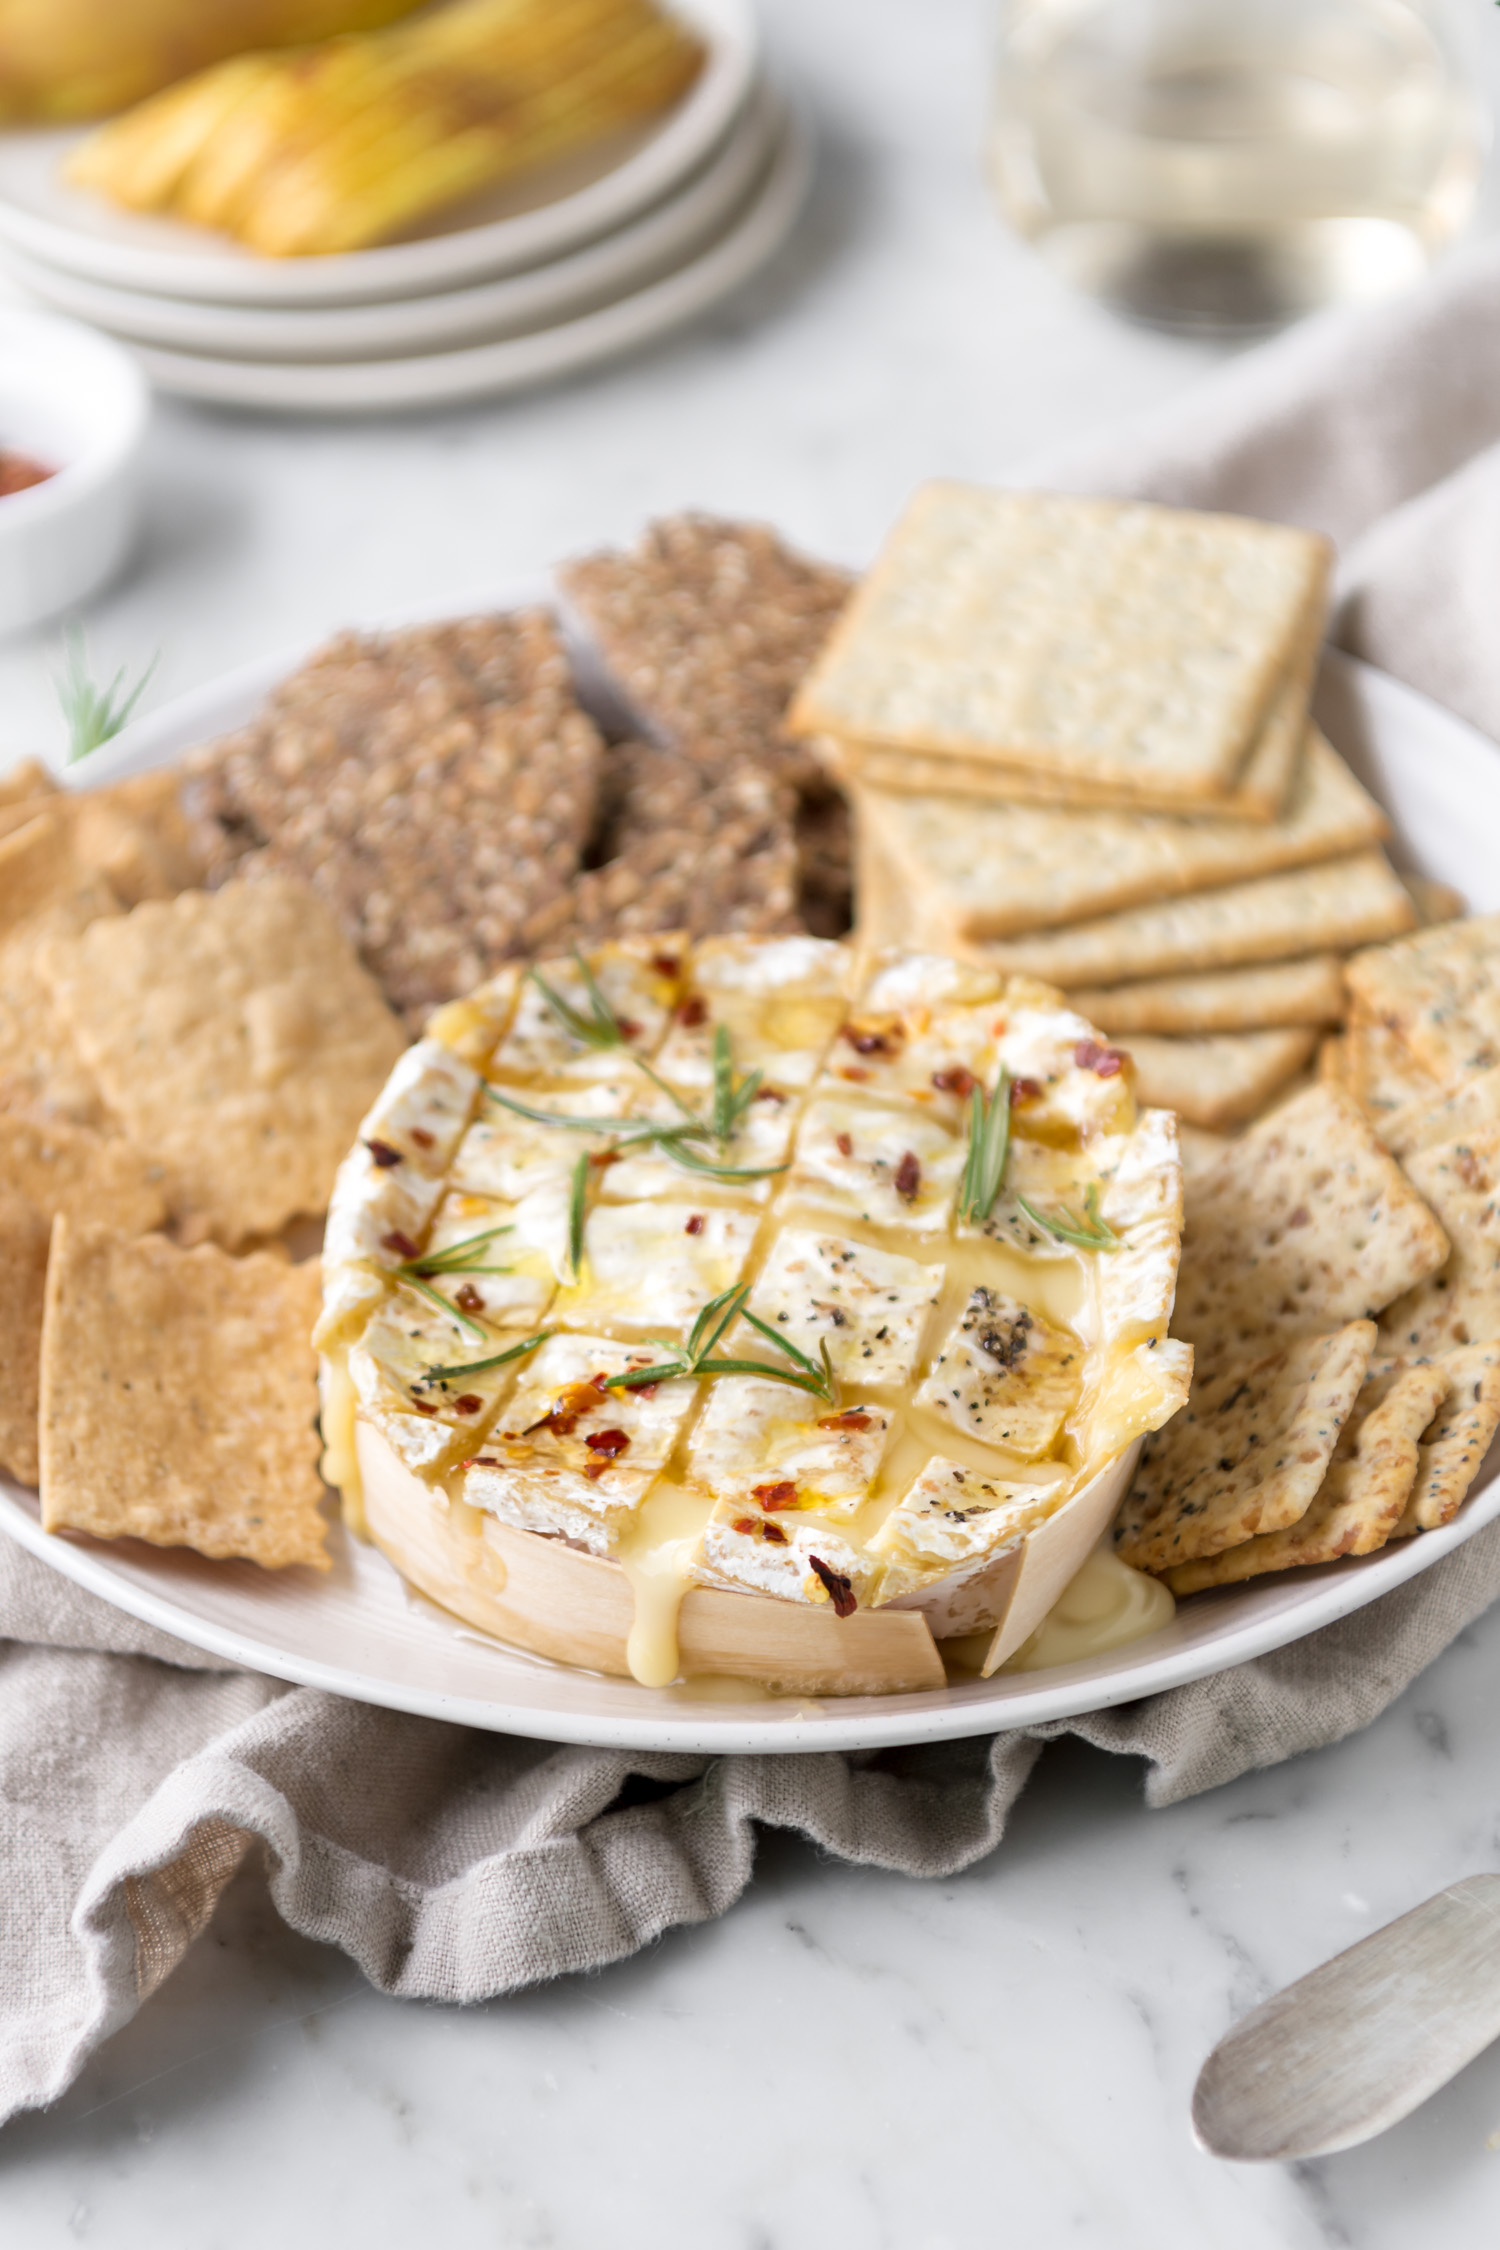 Afslachten uitspraak Boek honey baked camembert with rosemary and chili flakes - With Spice